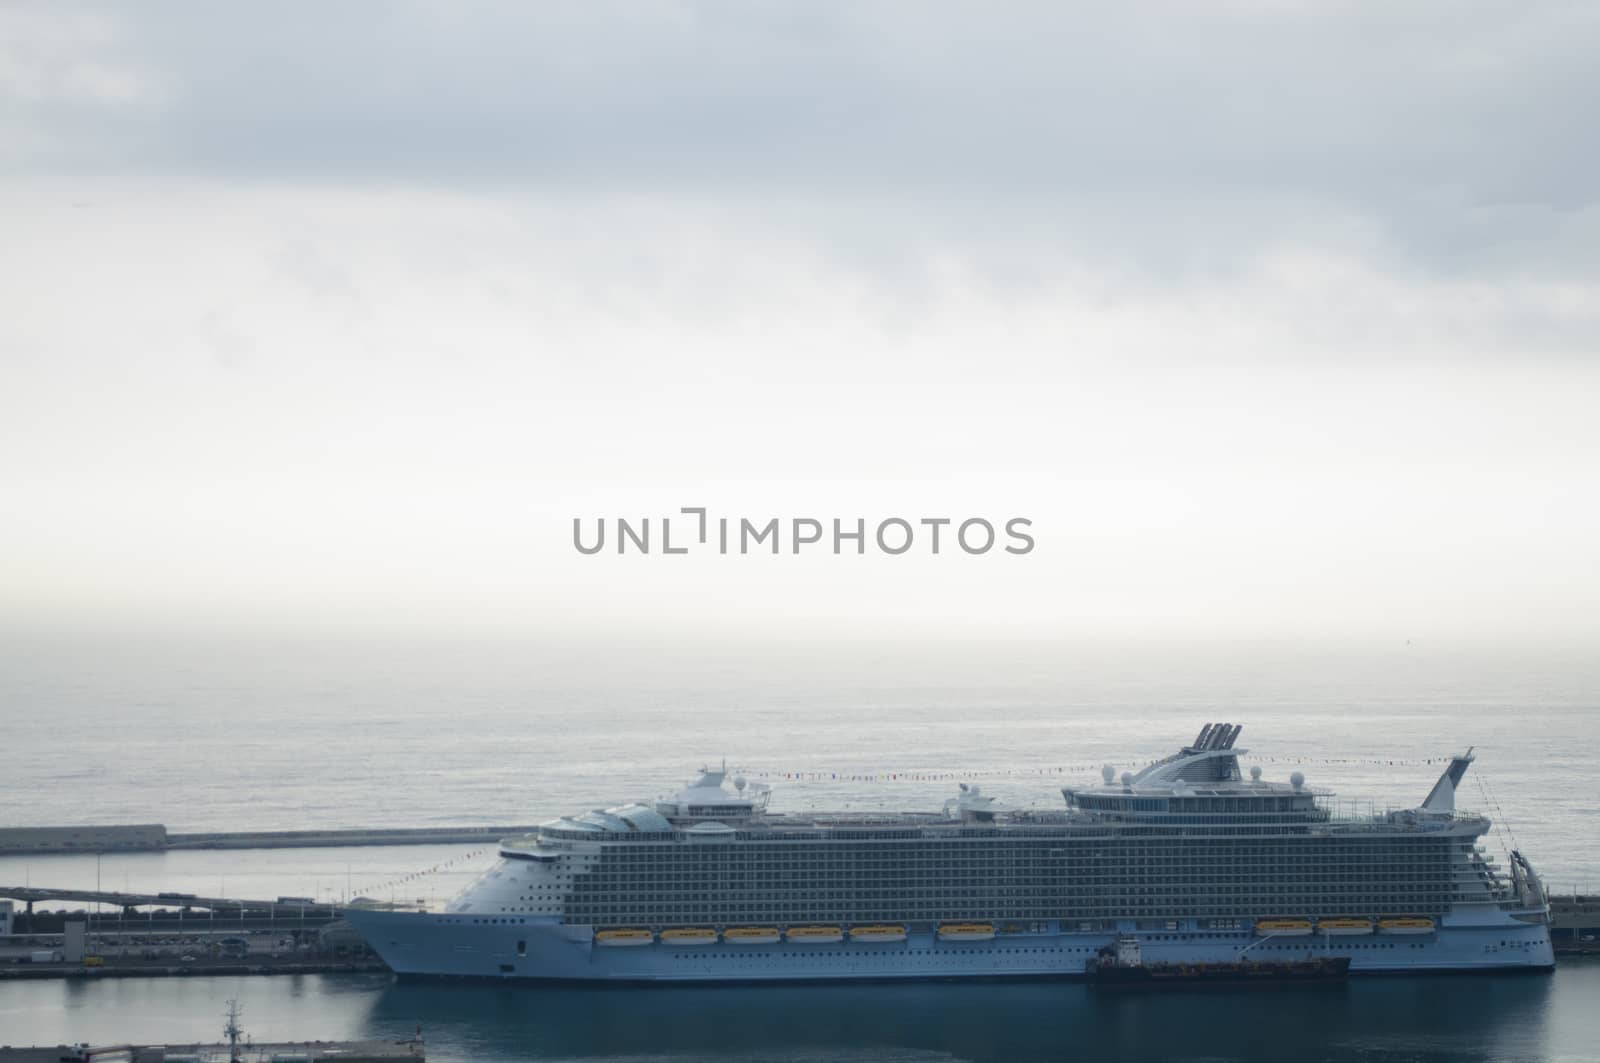 A luxury cruise liner in the port of Barcelona